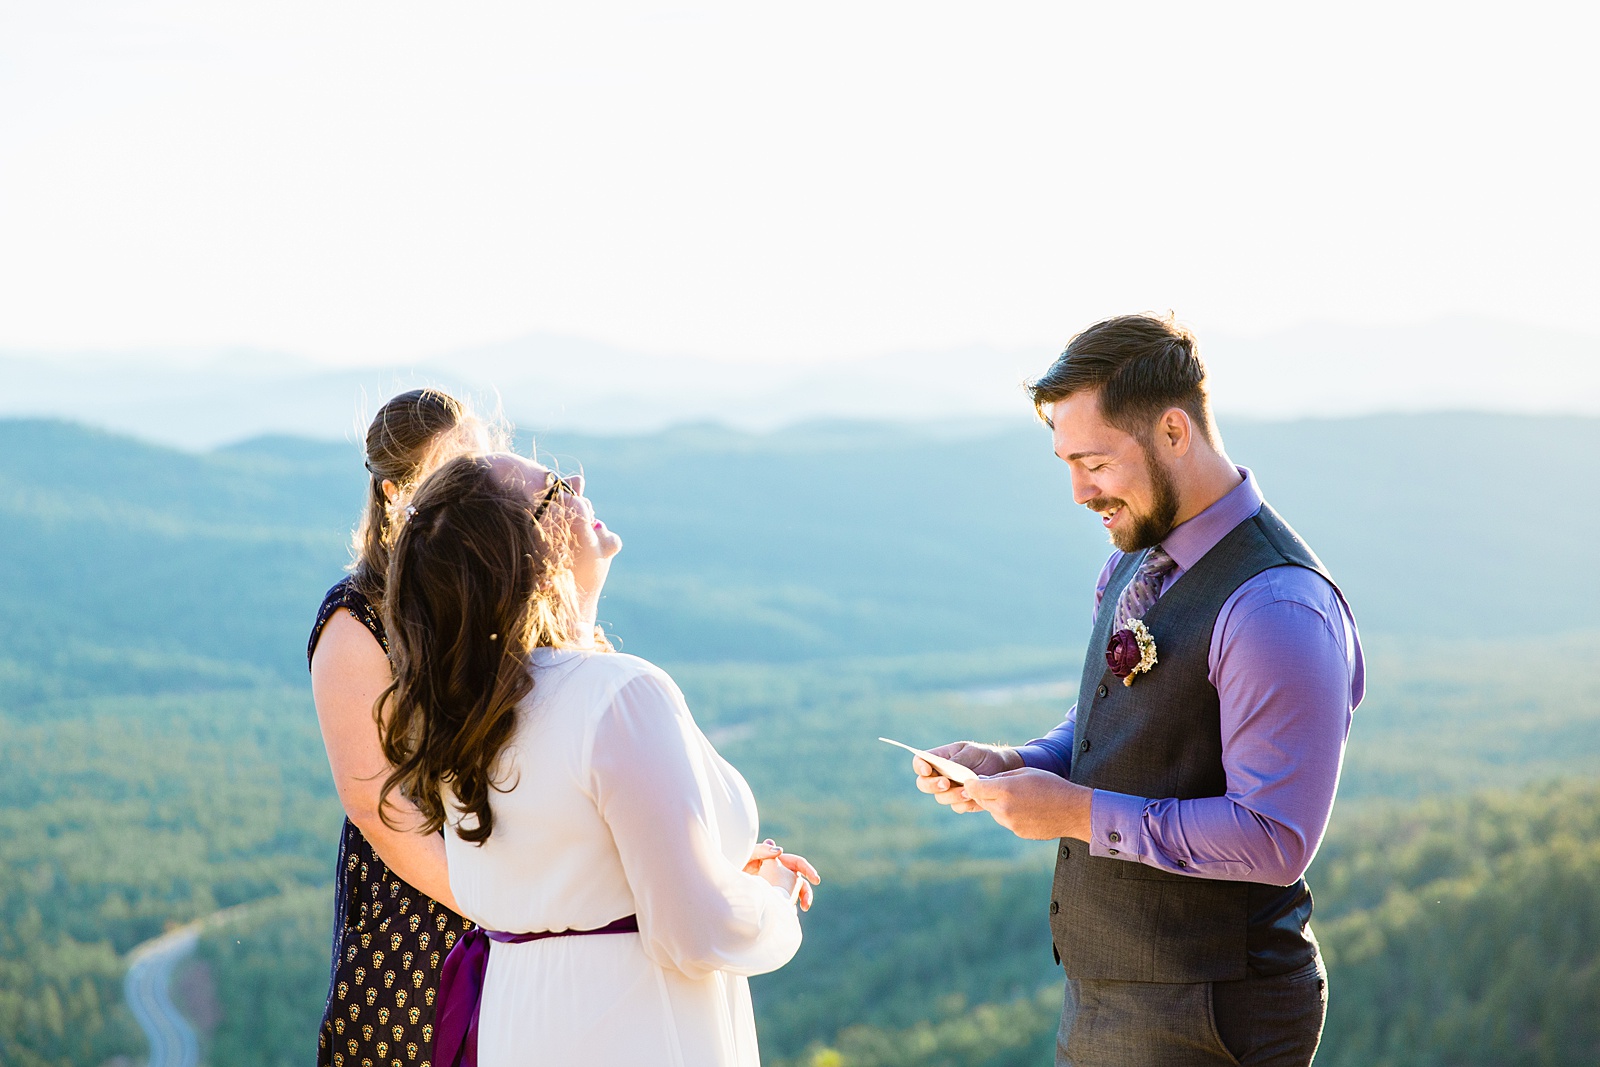 Groom reading vows while the bride laughs during their wedding ceremony at Mogollon Rim by Payson elopement photographer PMA Photography.